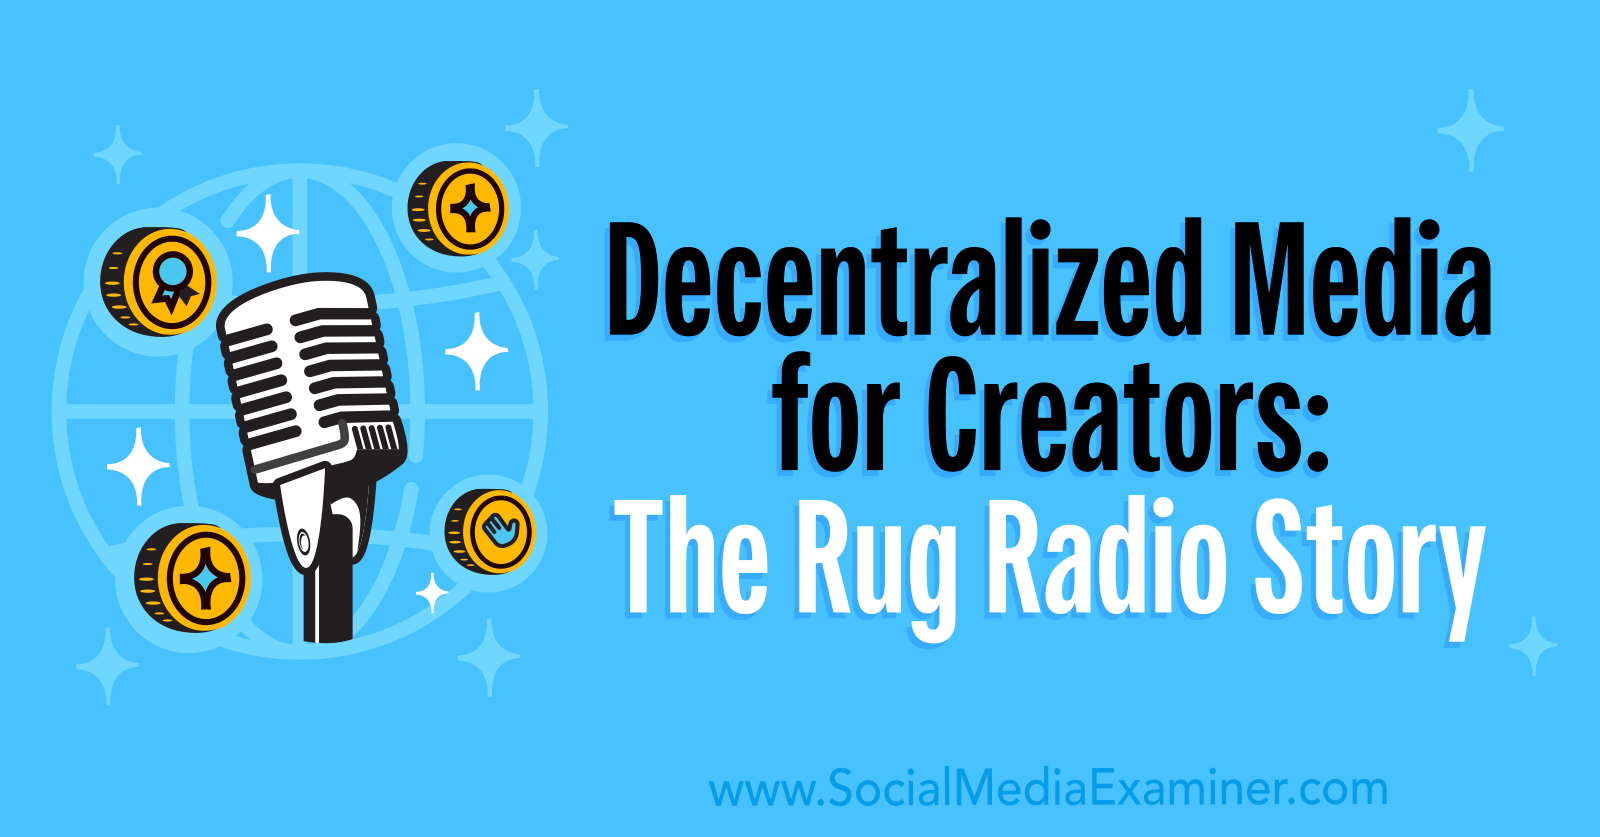 Decentralized Media for Creators: The Rug Radio Story by Social Media Examiner